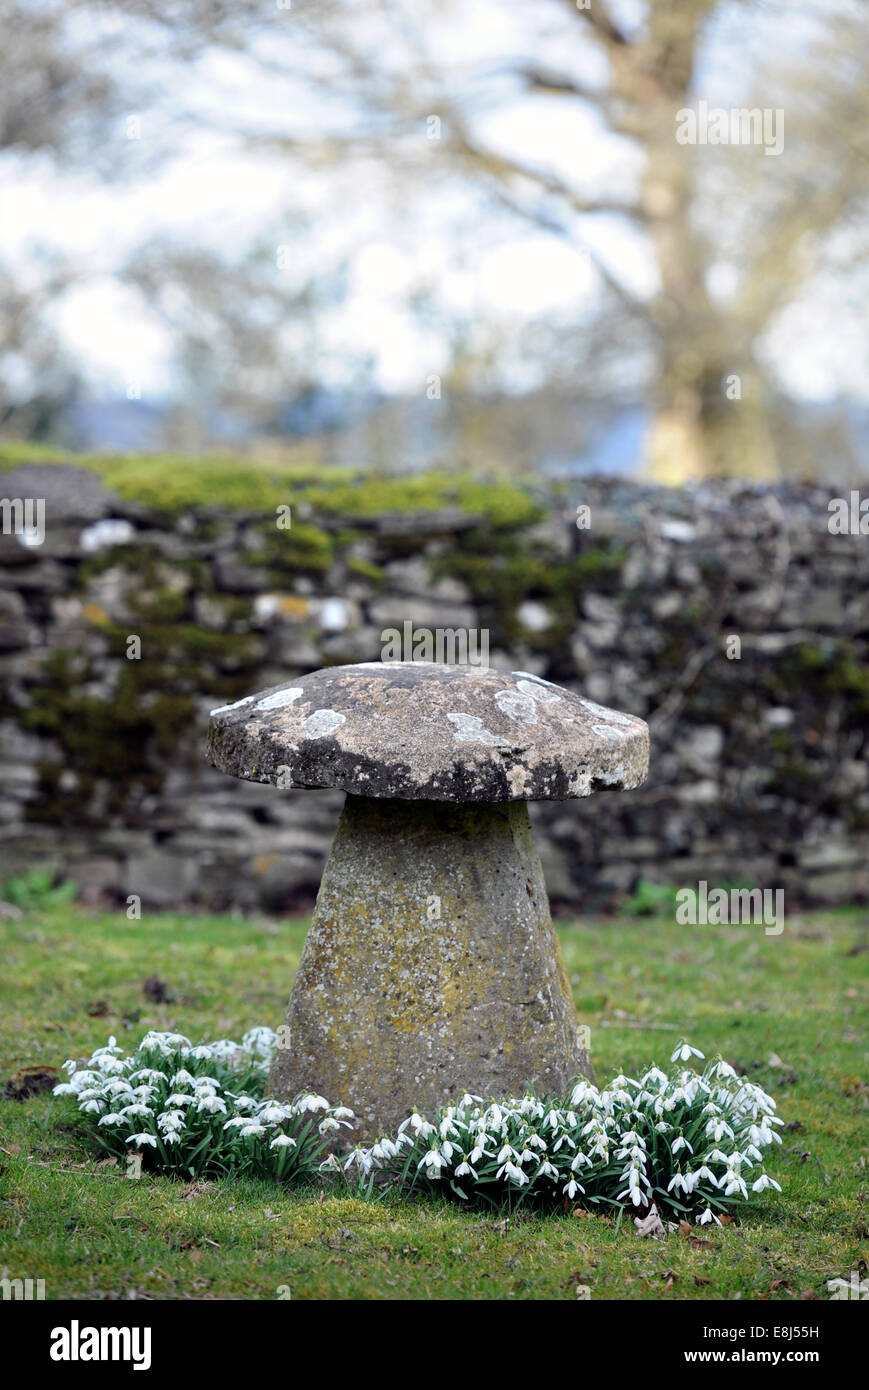 Snowdrops (Galanthus nivalis) surrounding a staddle stone in a Cotswold garden, Gloucestershire UK Stock Photo